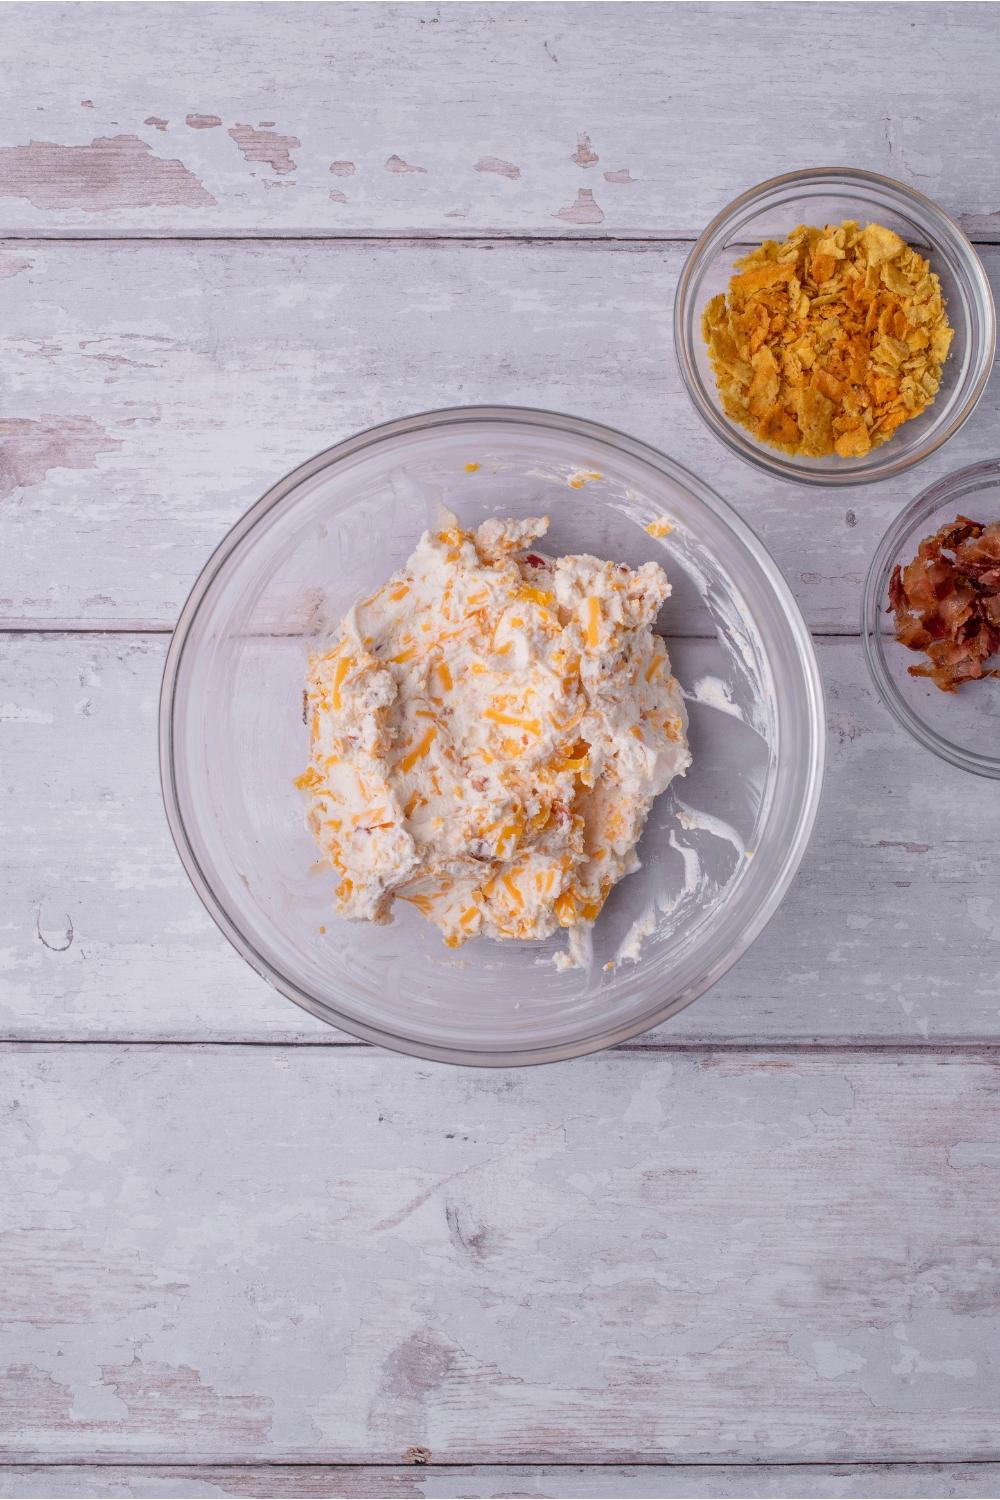 Clear bowl filled with a mixture of cream cheese, shredded cheese, and crumbled bacon. Next to the bowl are small bowls of bacon and crushed tortilla chips.